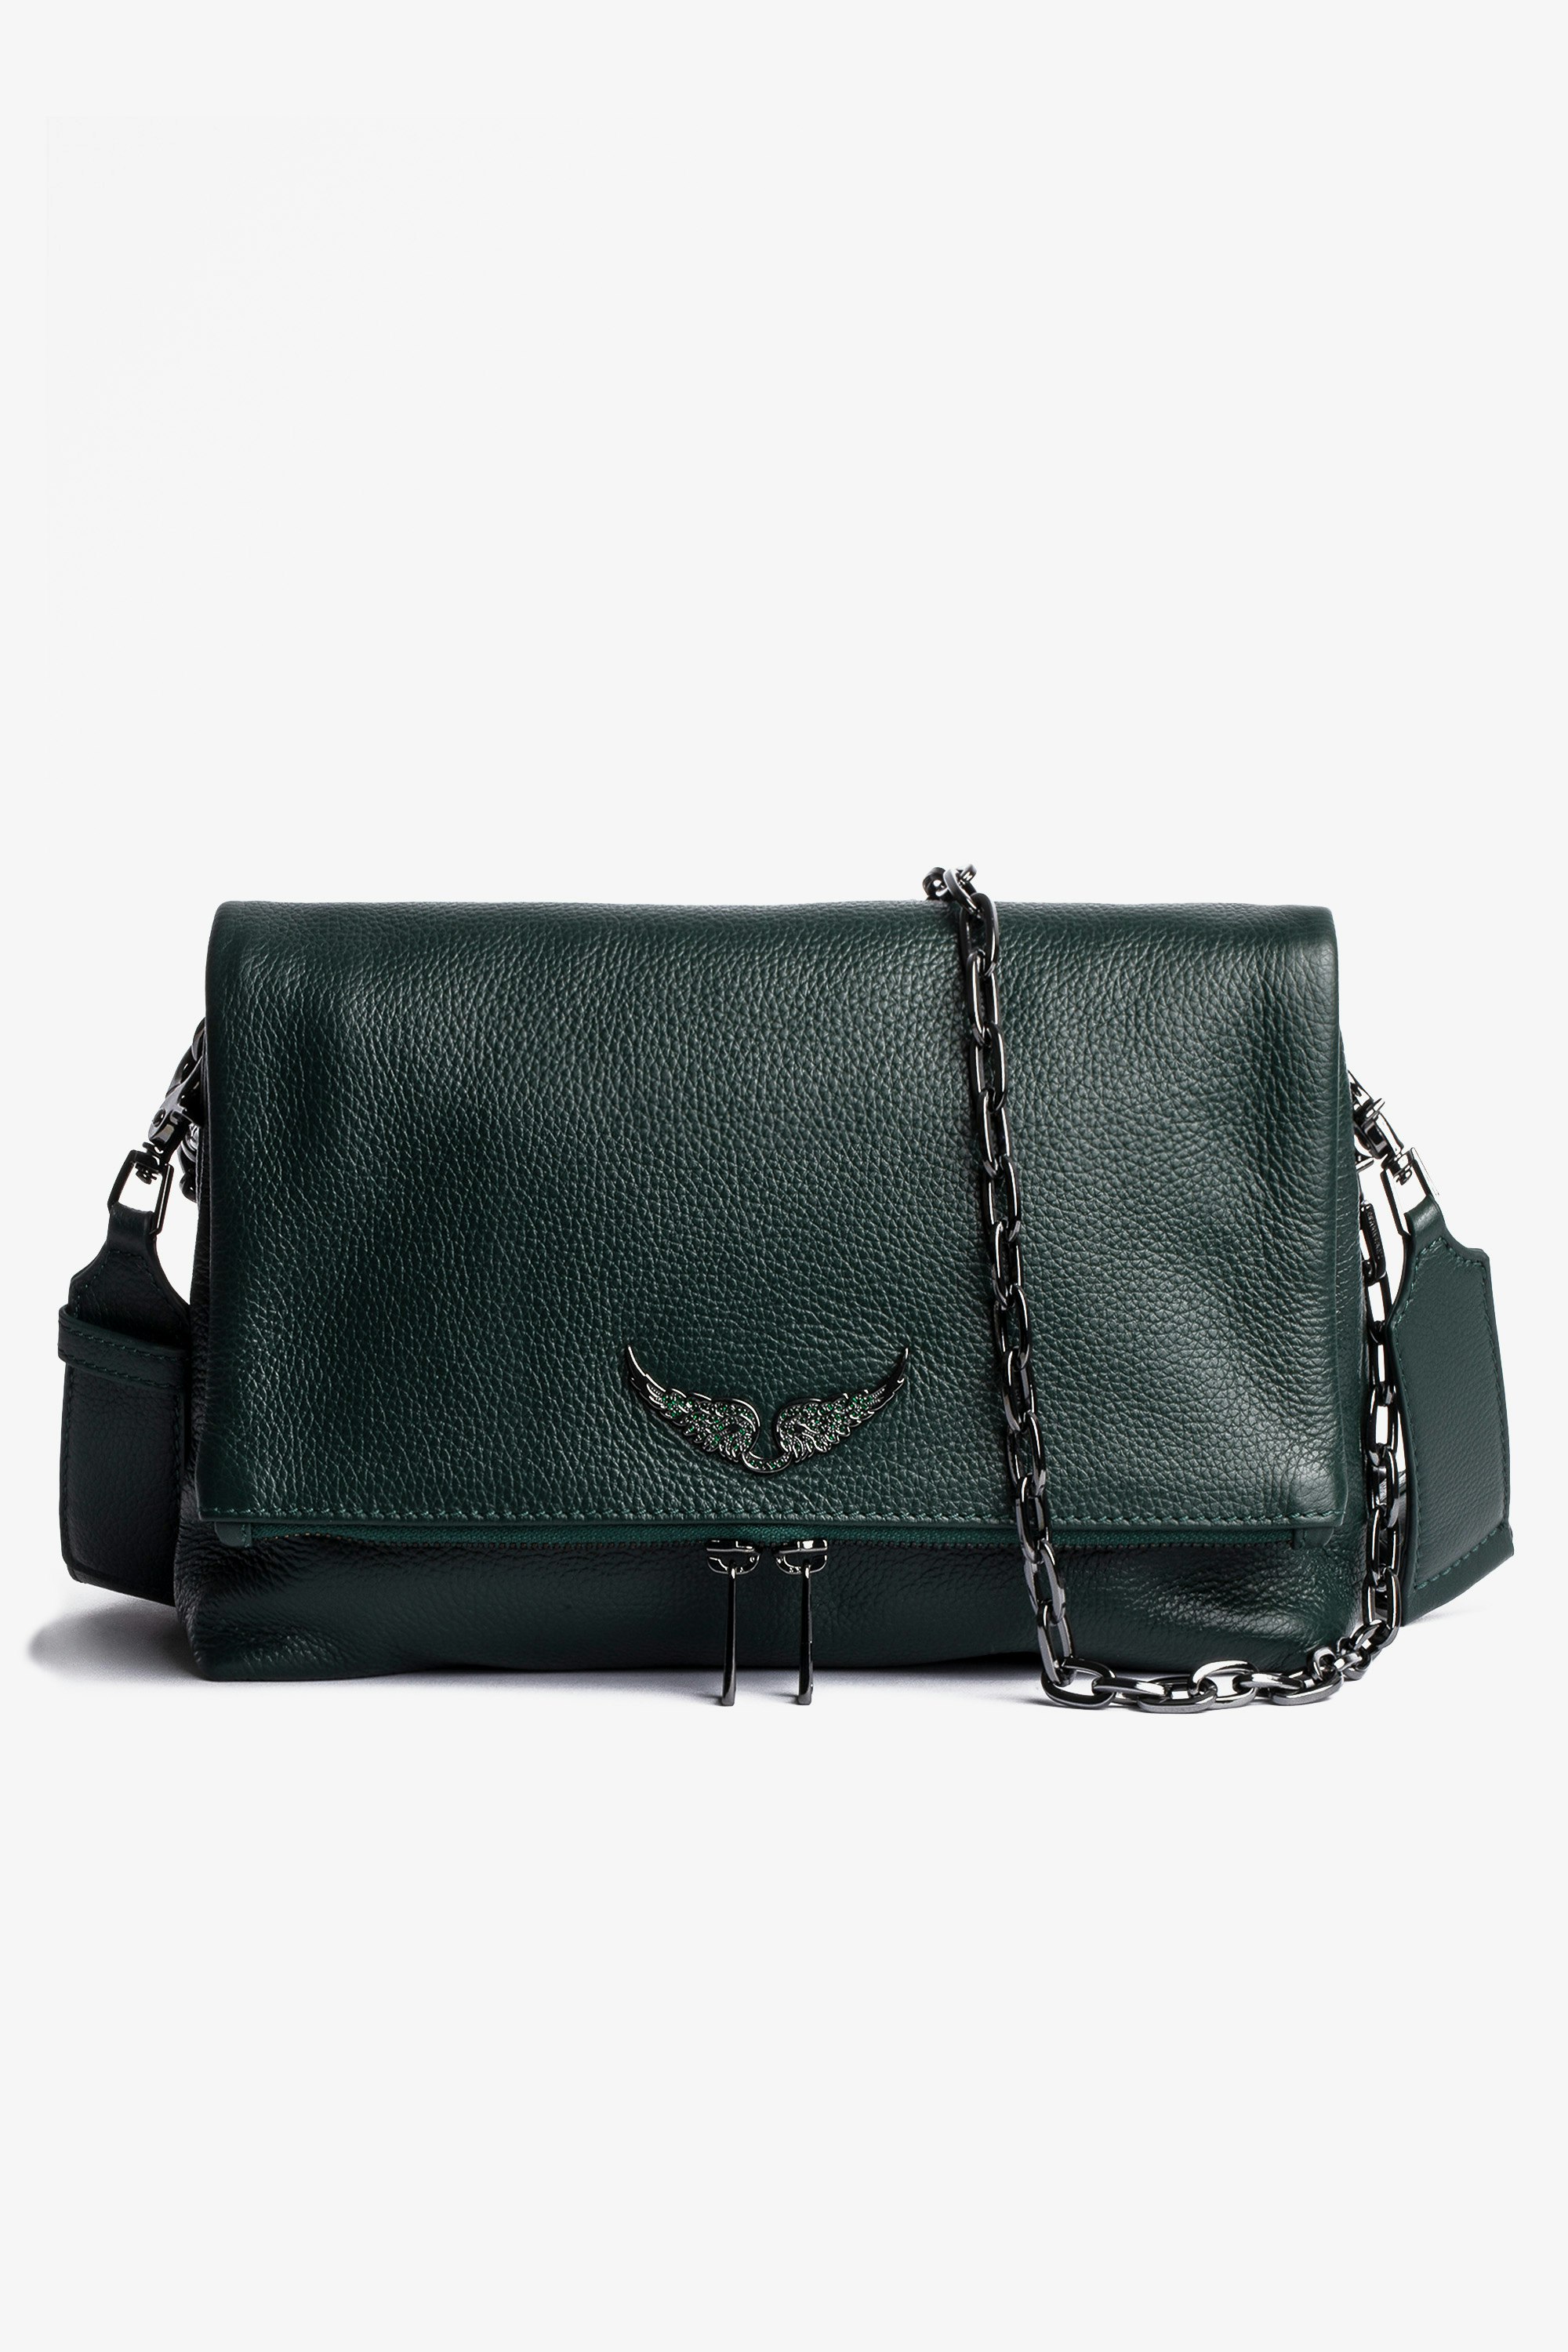 Rocky バッグ Women's bag with shoulder strap in metallic green leather